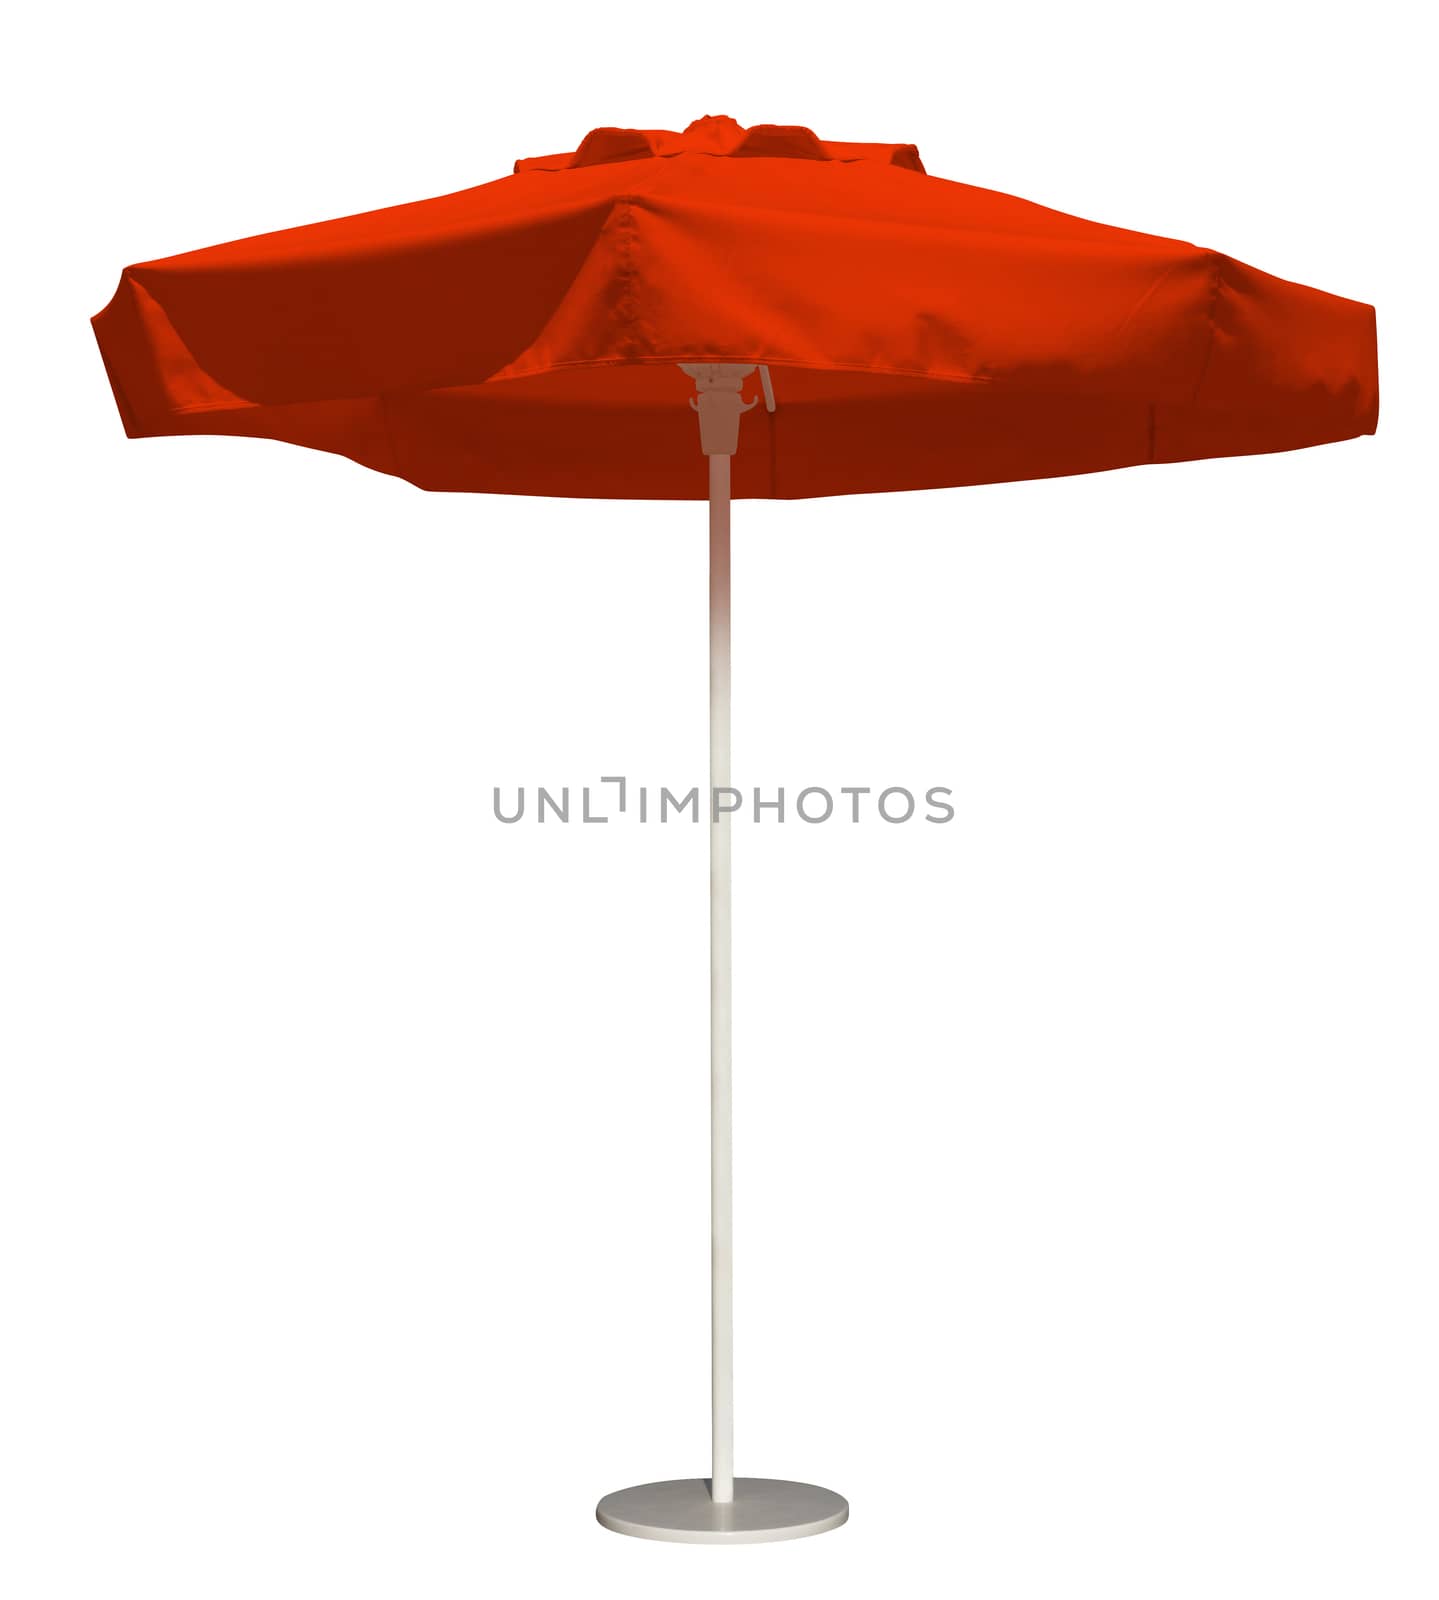 Red beach umbrella isolated. Clipping path included.